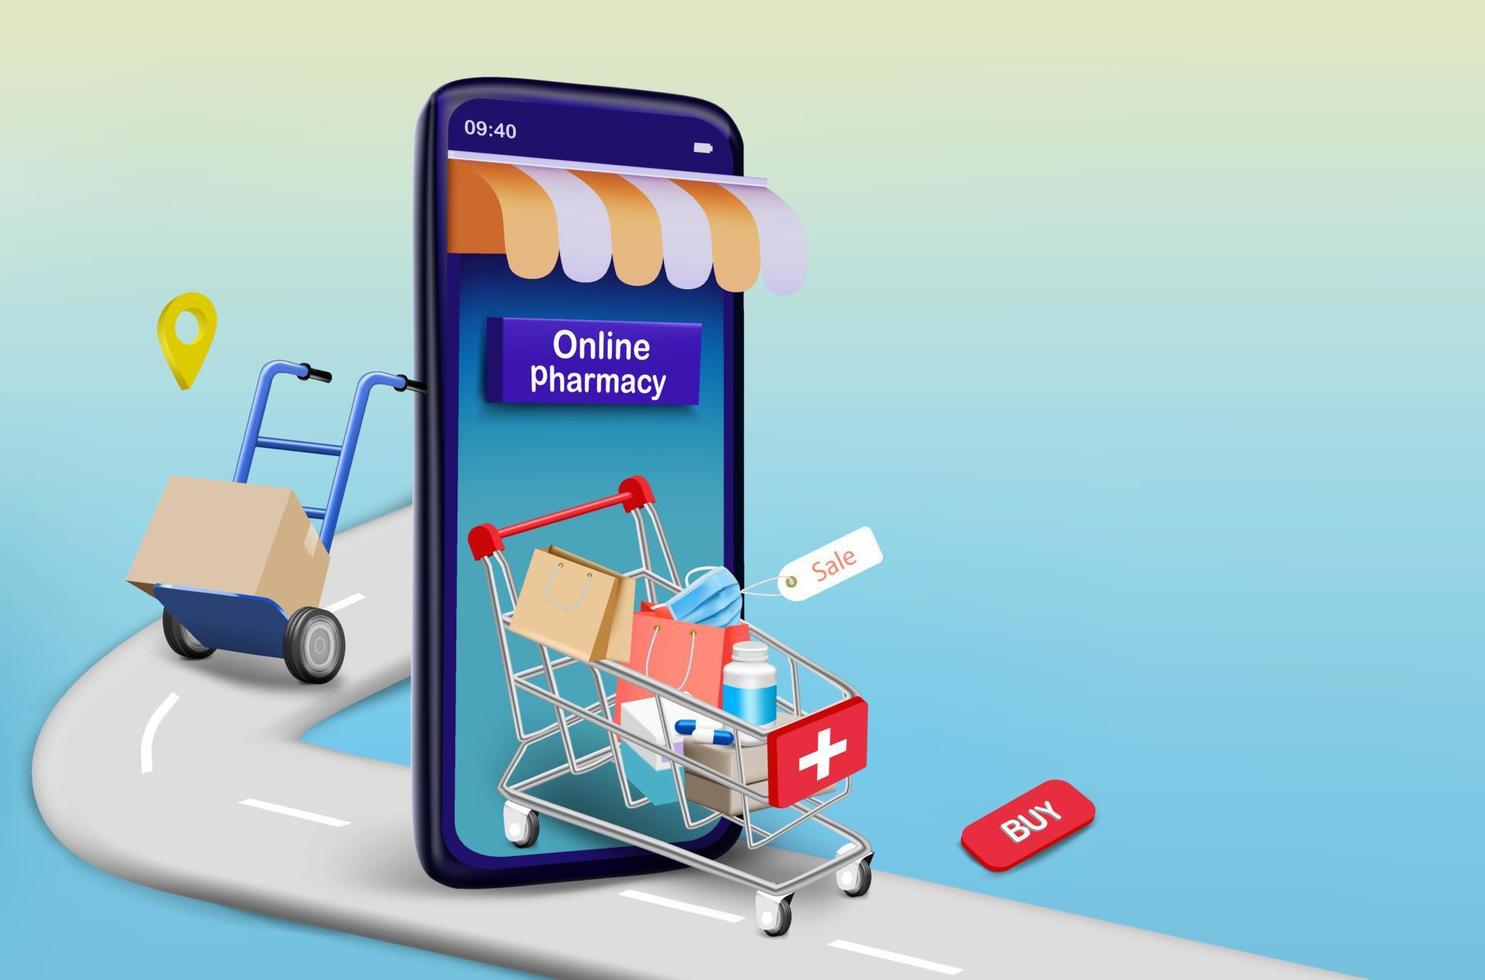 Shopping cart with medicine on the road for online pharmacy vector